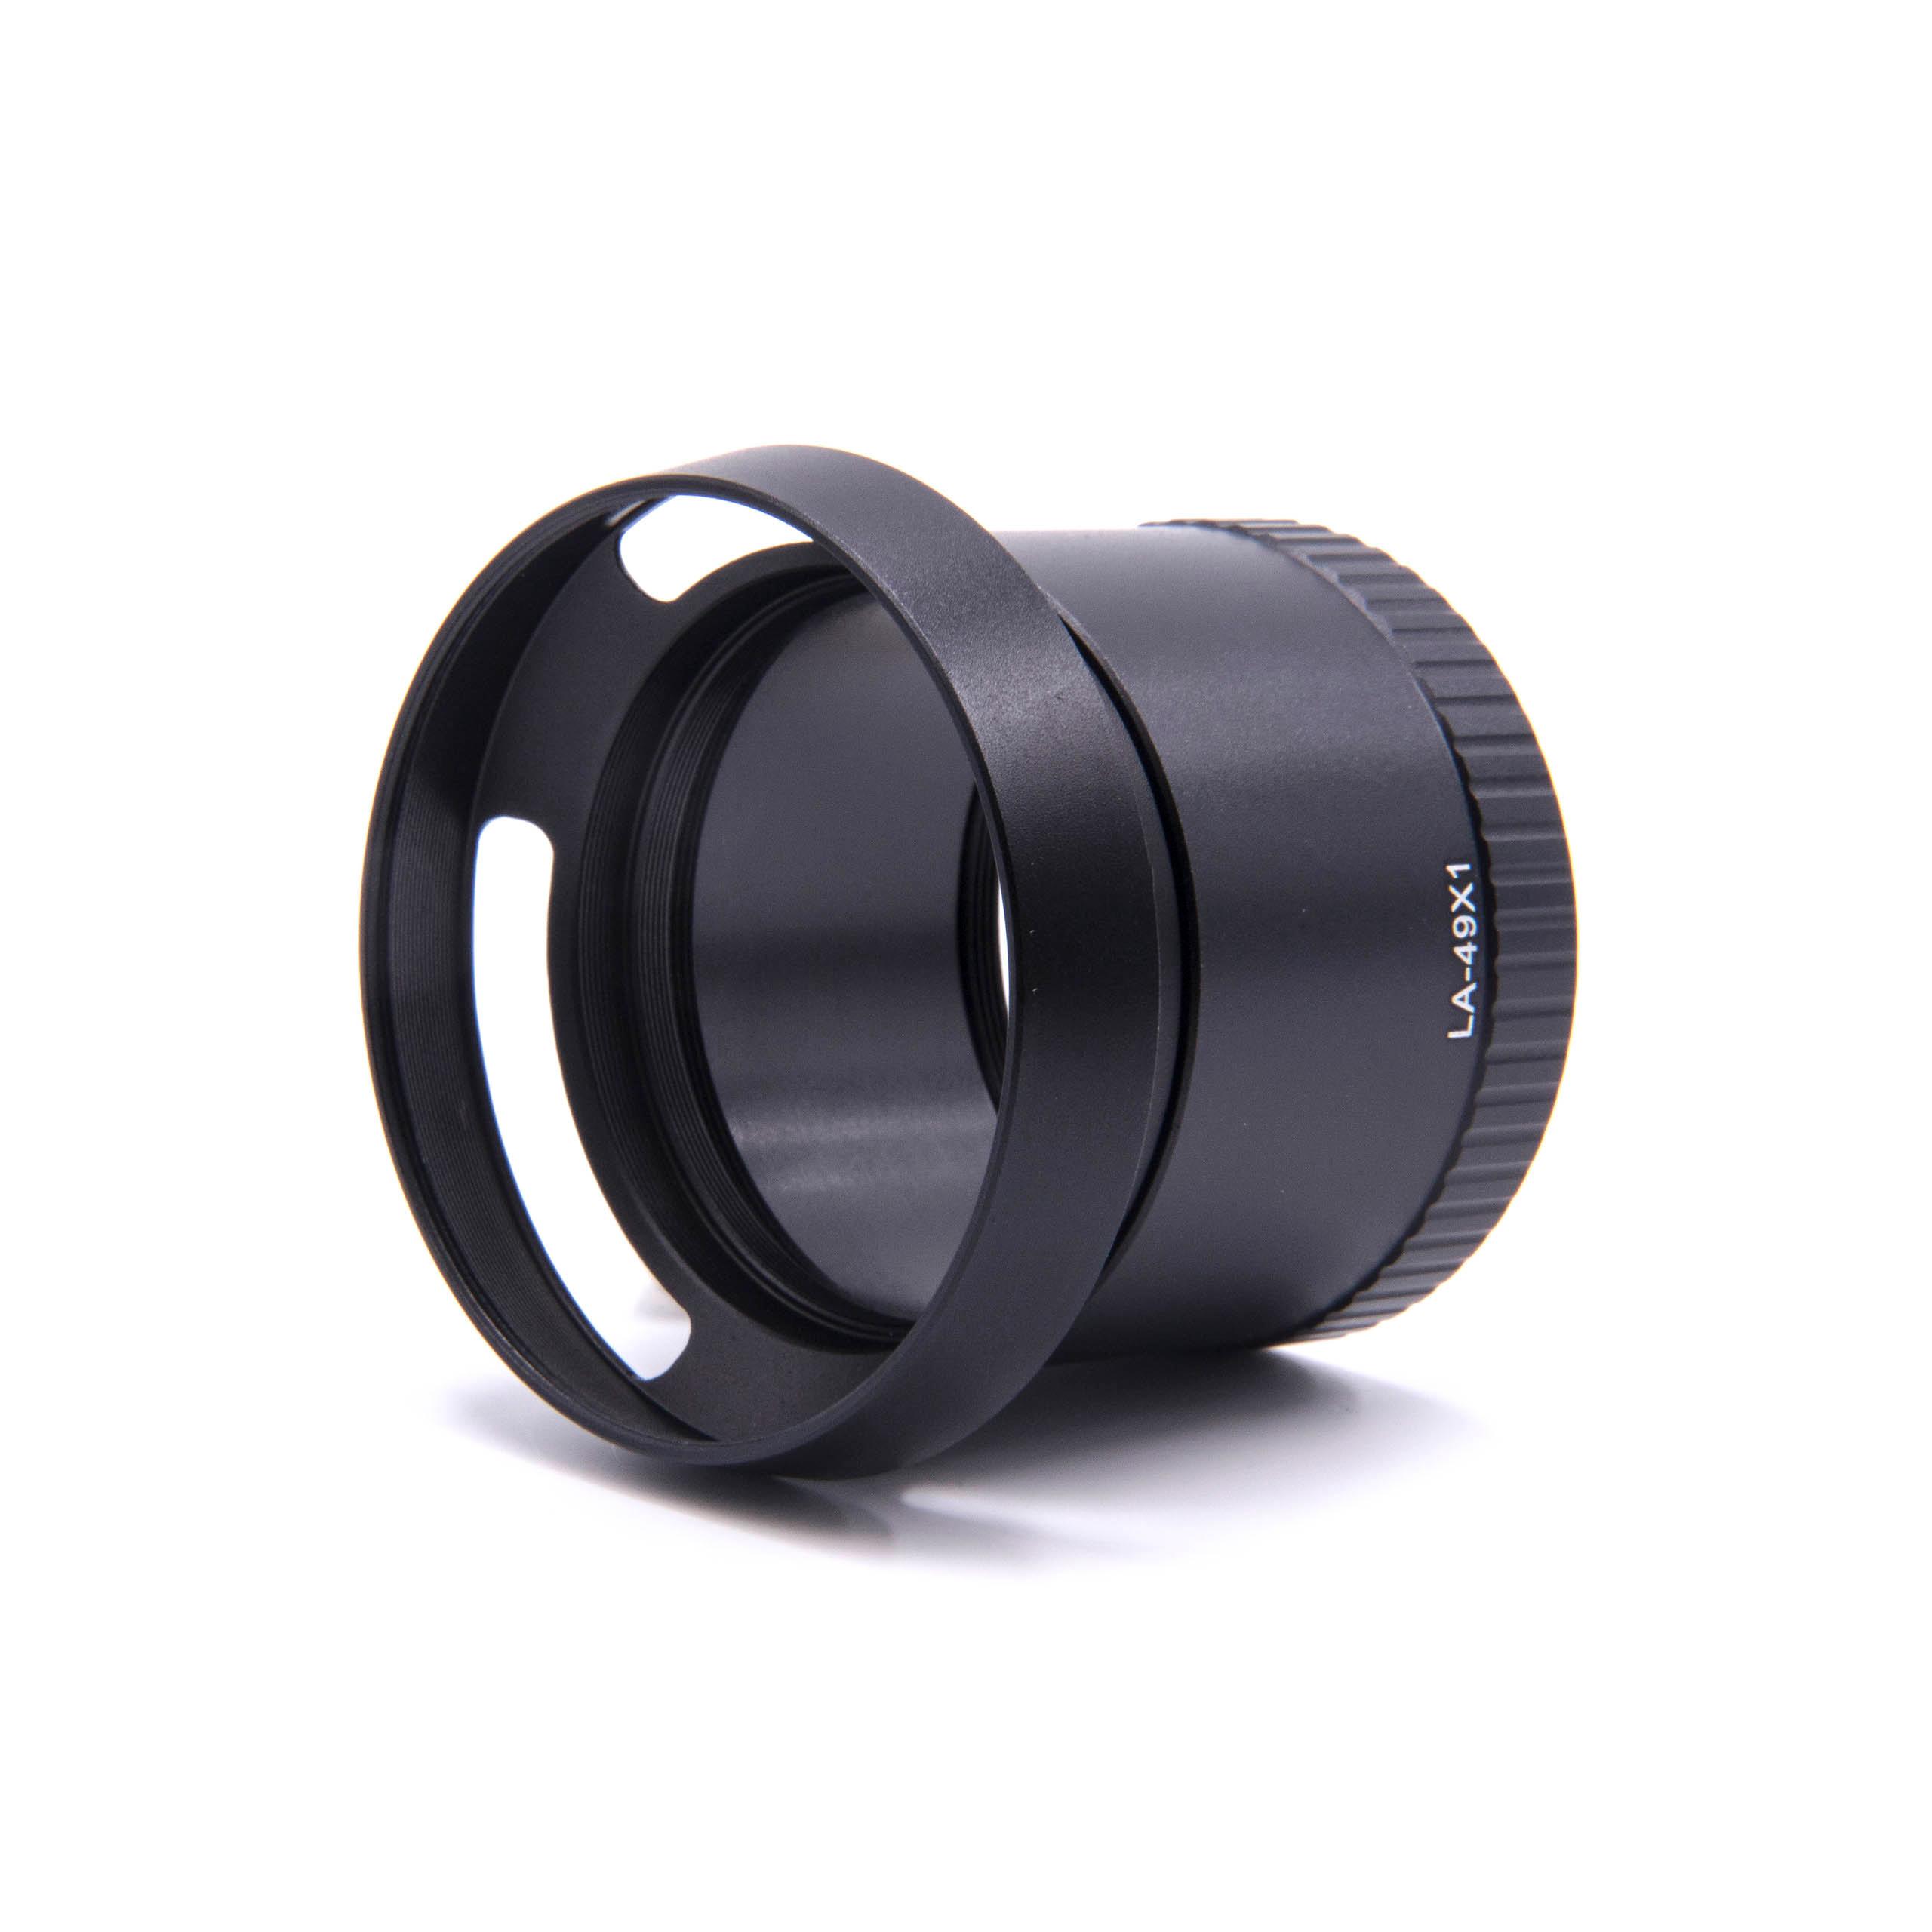 49 mm Filter Adapter, Tubular suitable for Leica X1, X2 Camera Lens